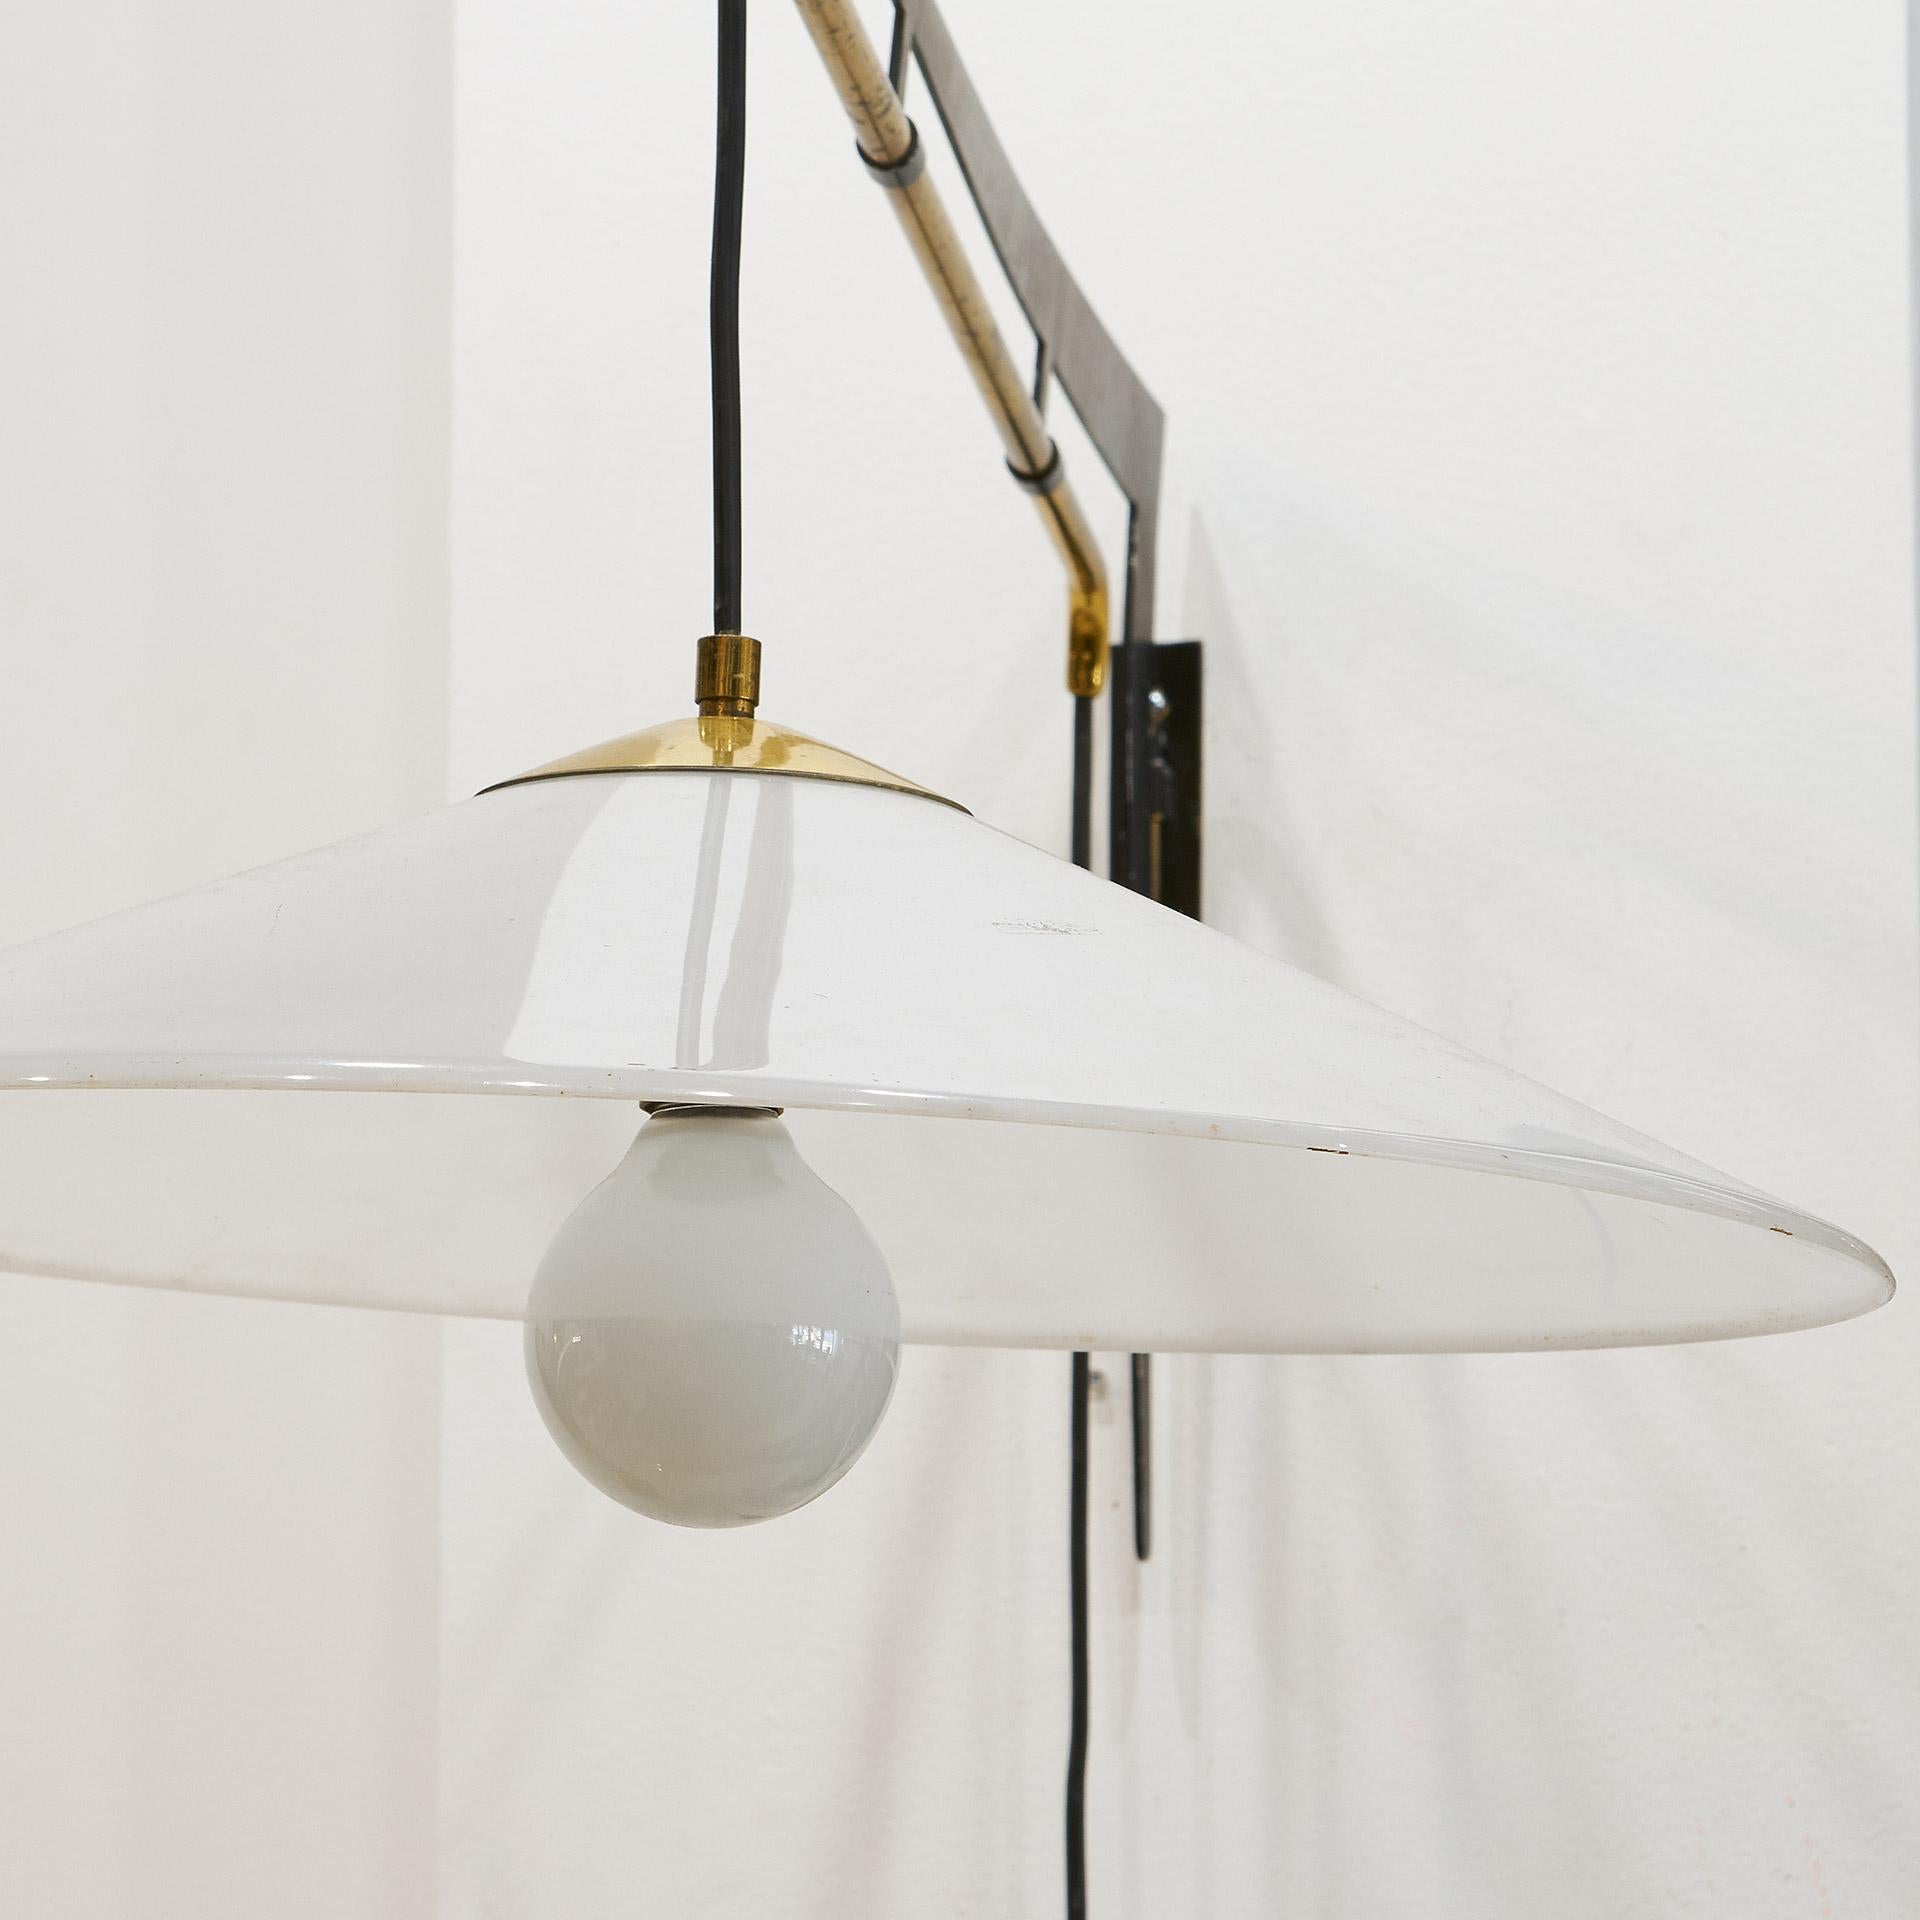 An Italian swing arm wall light designed by Stilux featuring a brass counterweight and adjustable height and projection features. The black metal frame mounts to the wall; utilizes one bulb. This has been newly rewired for US use. The shade is